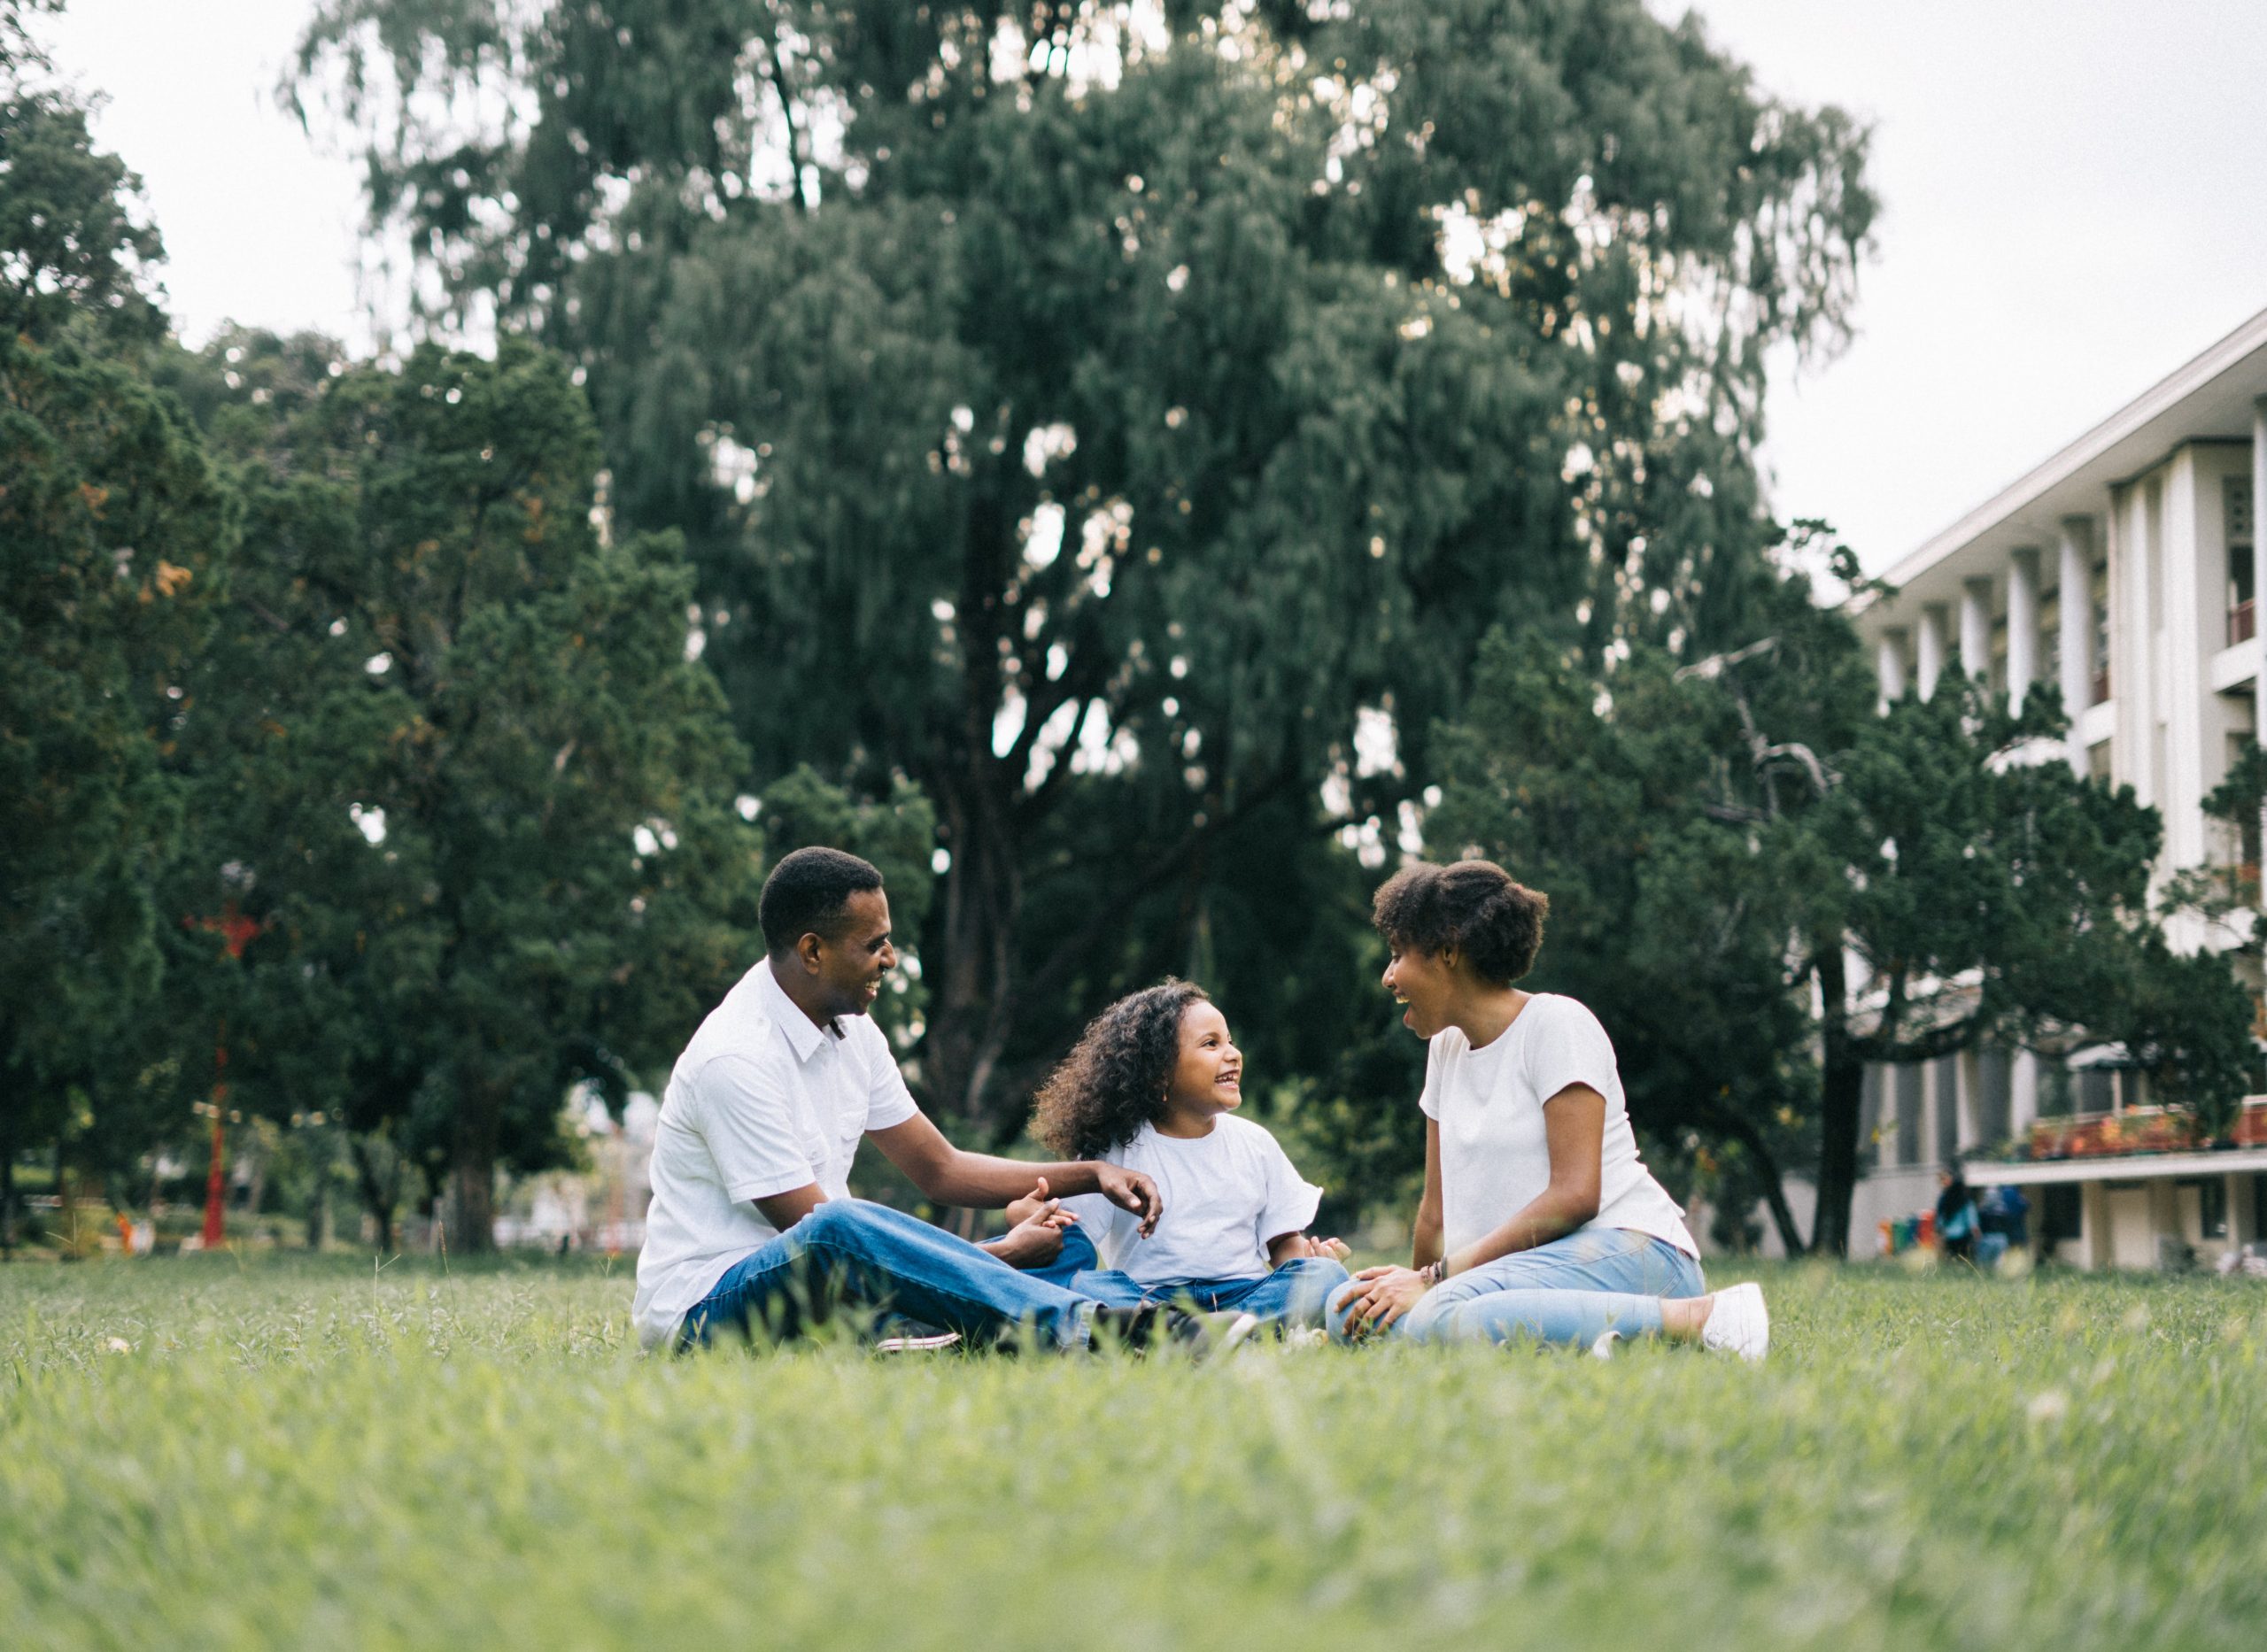 A joyful family sitting on grass in a park, parents and child laughing together. 